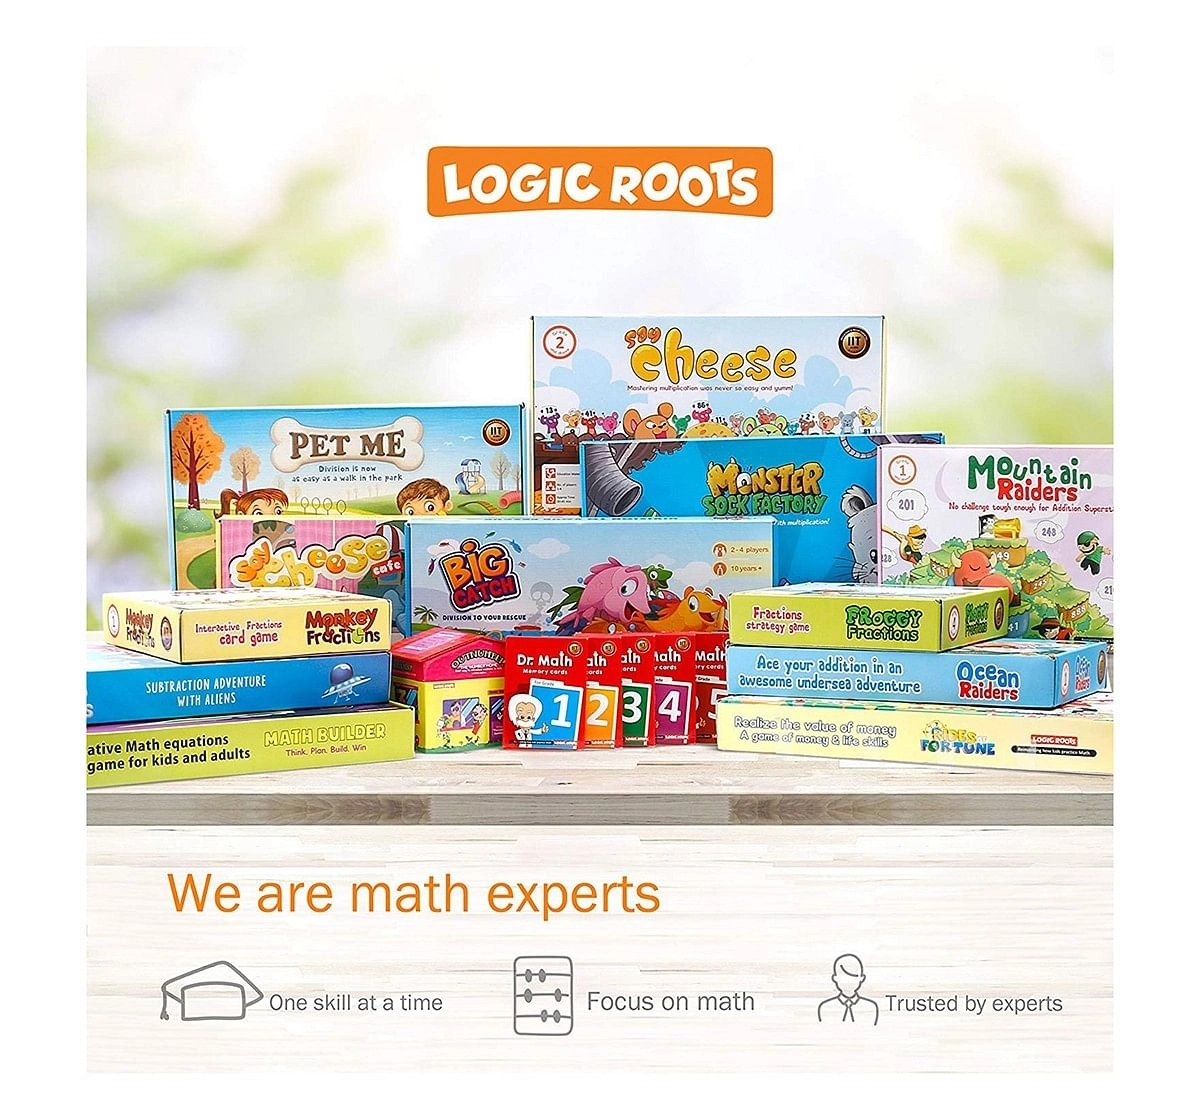 Logic Roots Cloud Hopper Addition & Subraction Game Games for Kids age 6Y+ 